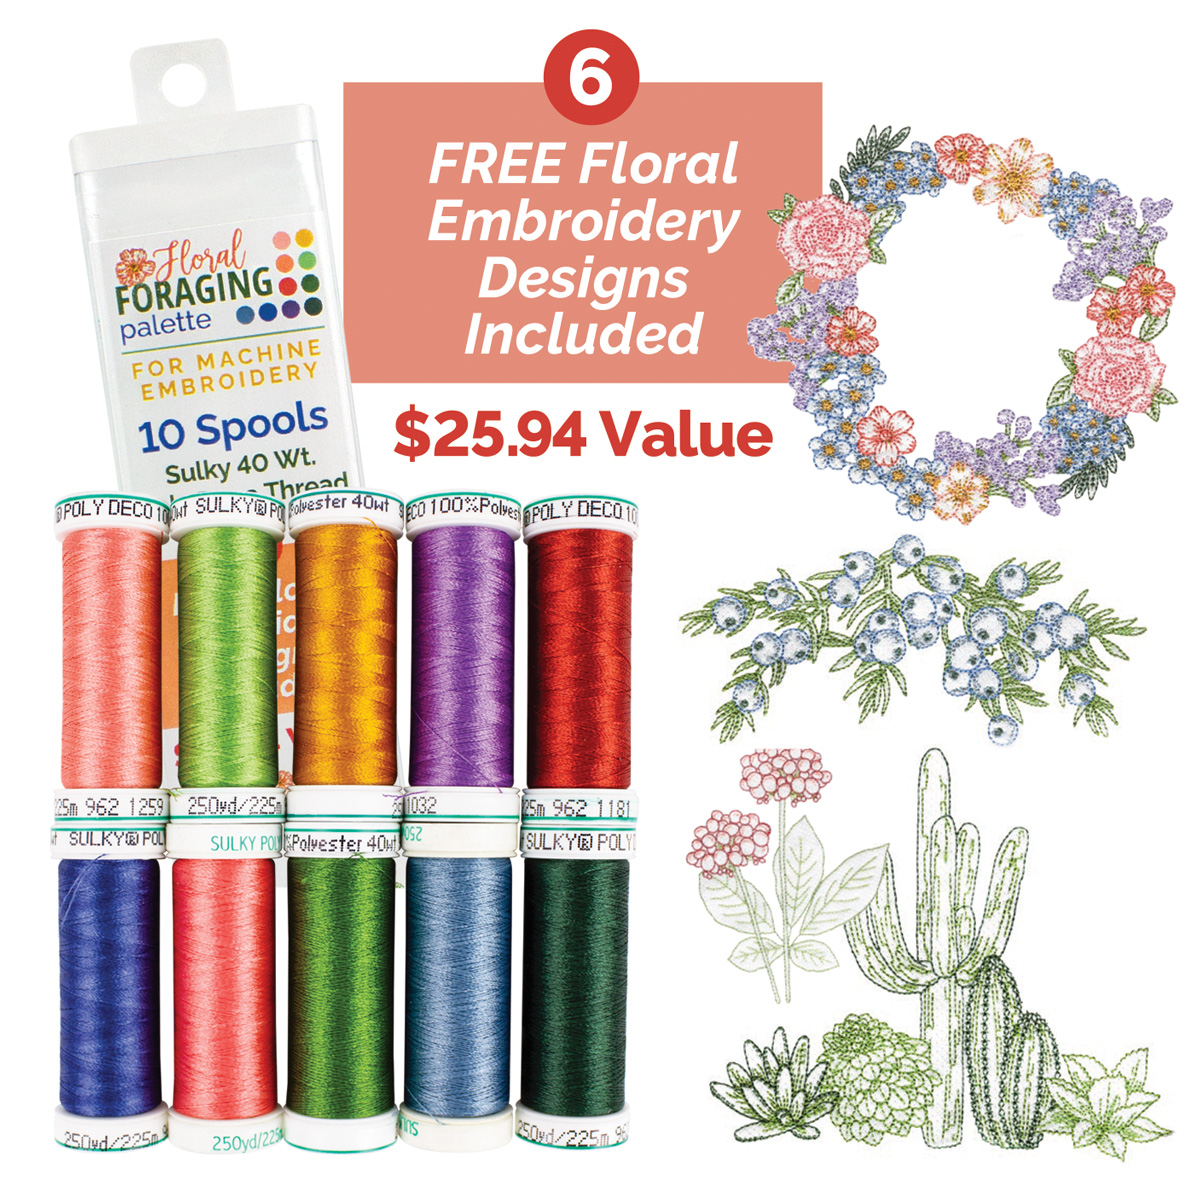 Floral Foraging Poly Deco Machine Embroidery Palette - 10-pack + 6 Designs Questions & Answers